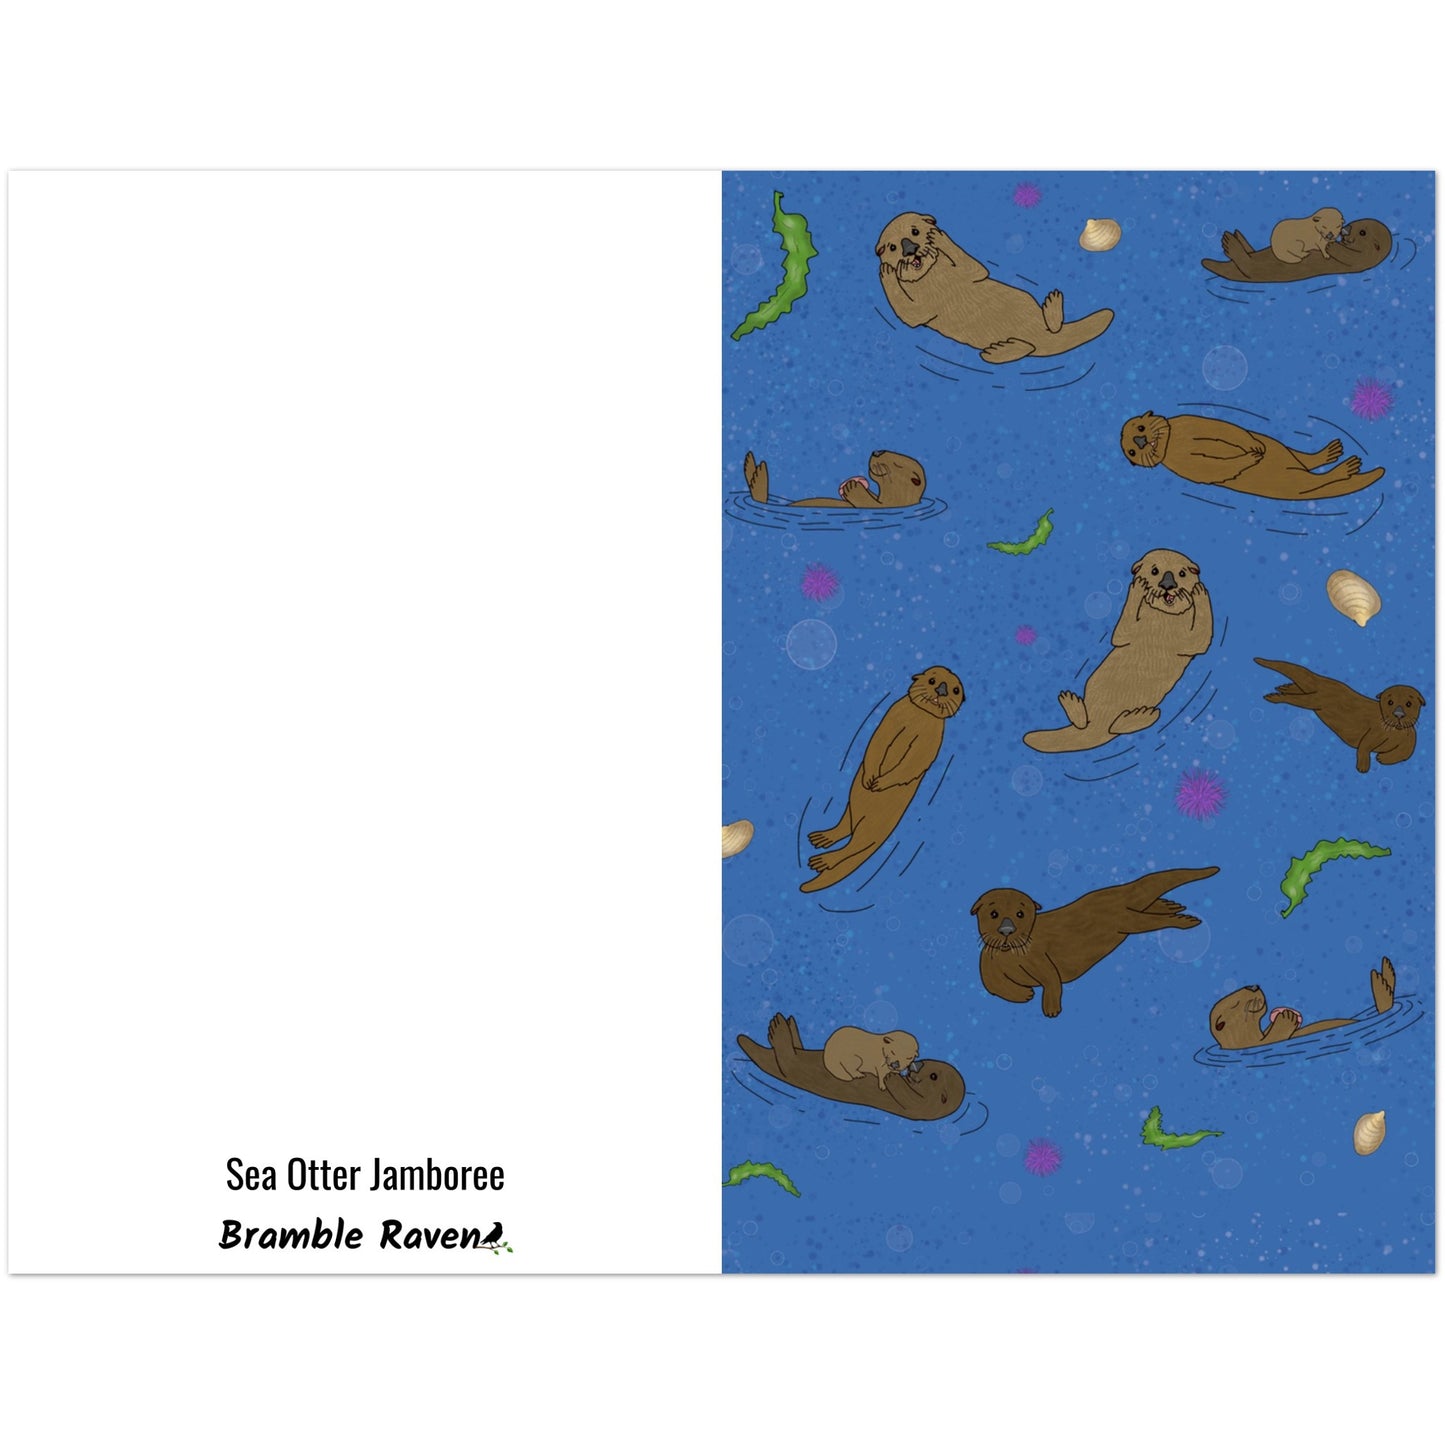 Pack of ten 5 x 7 inch greeting cards. Features illustrated sea otters on the front. Inside is blank. Made of coated paperboard. Comes with envelopes.